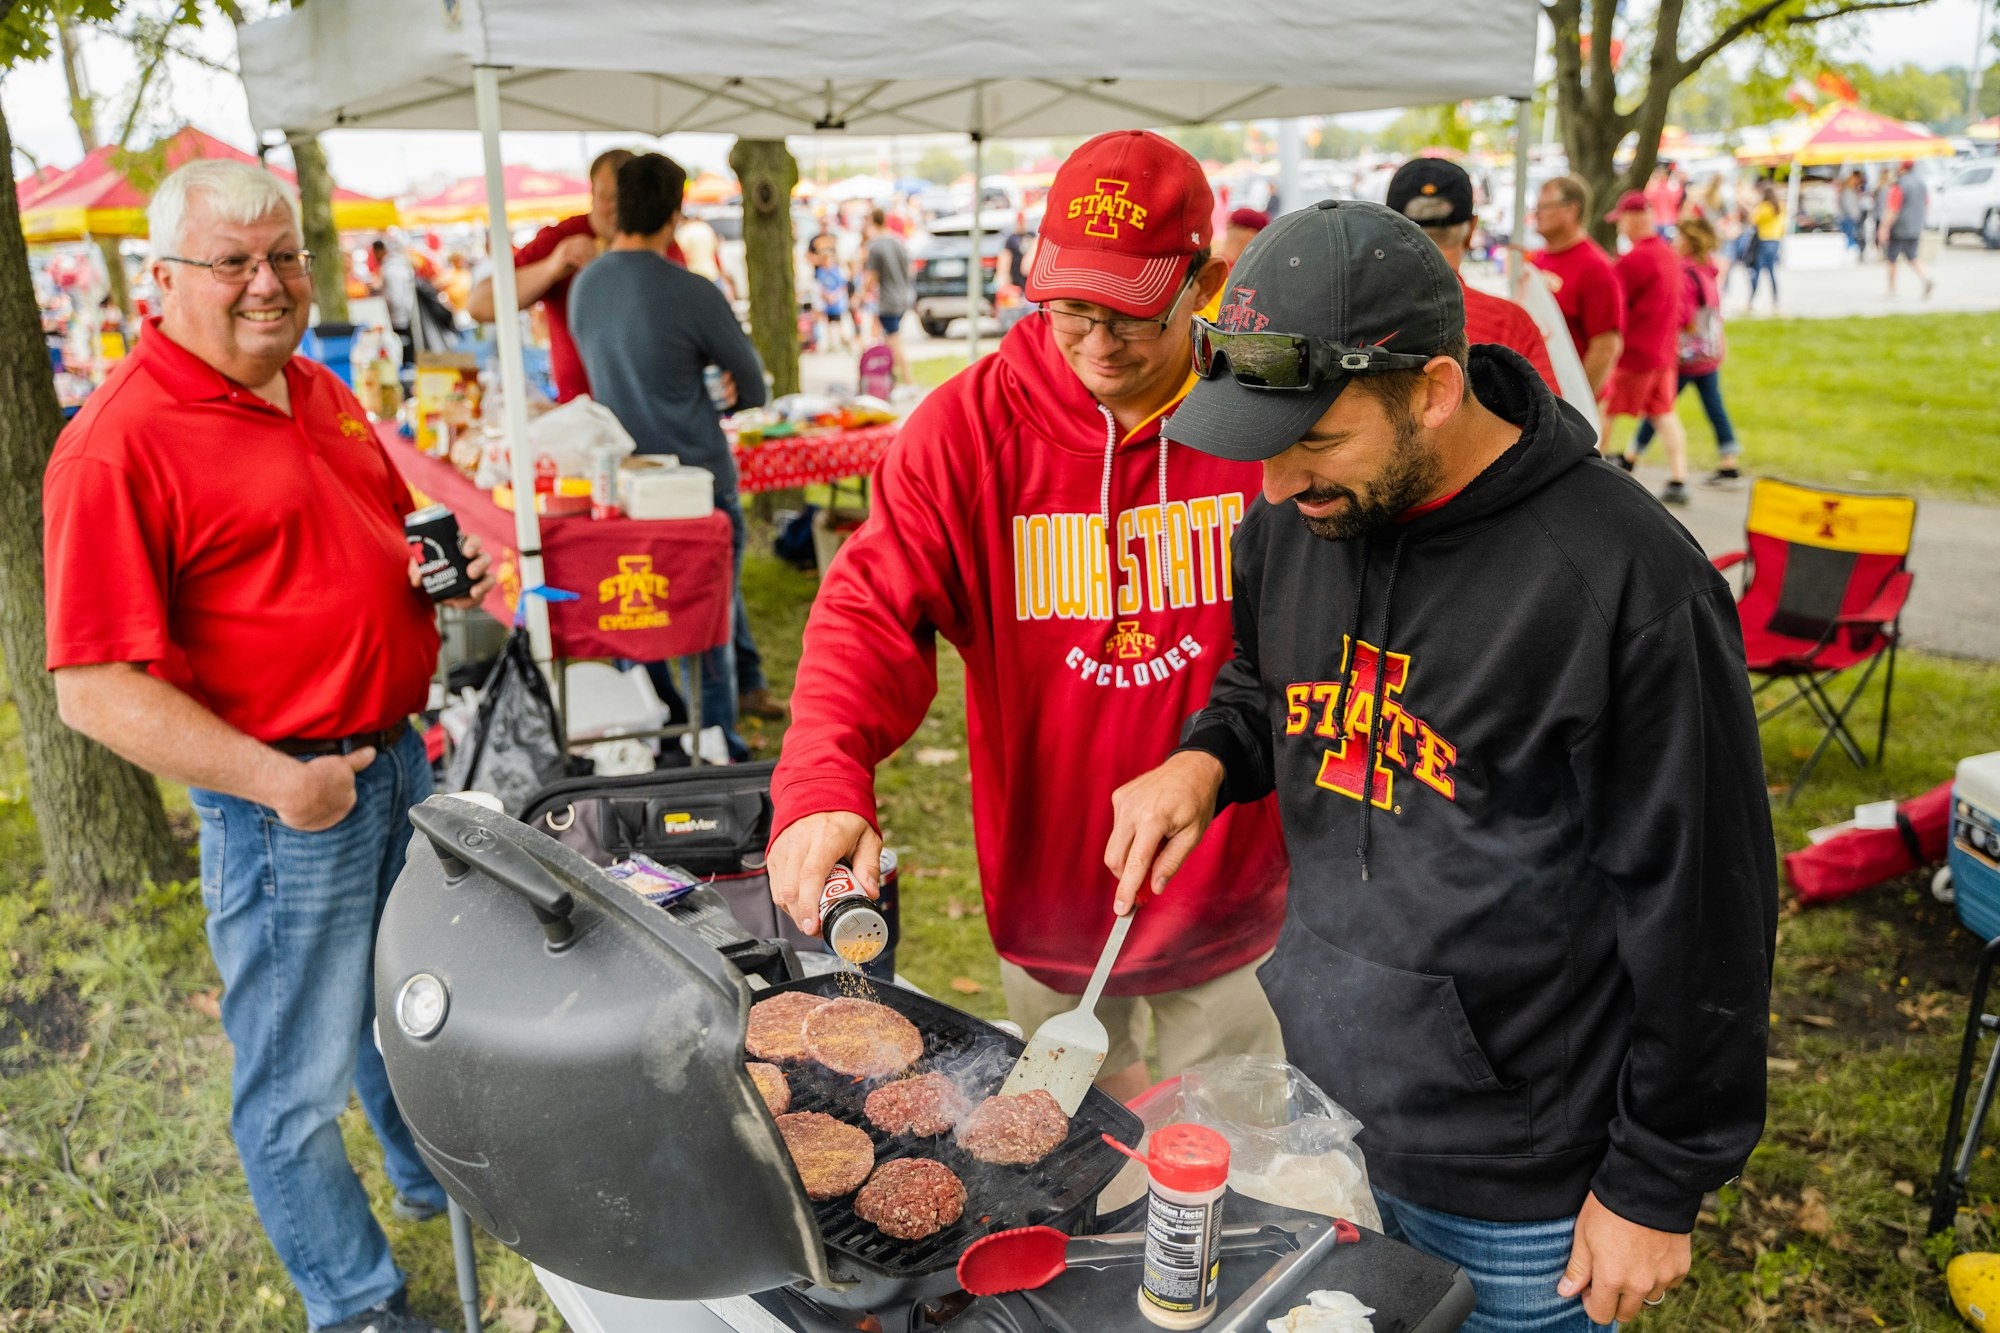 Iowa State fans grill burgers during a tailgate at a football game.